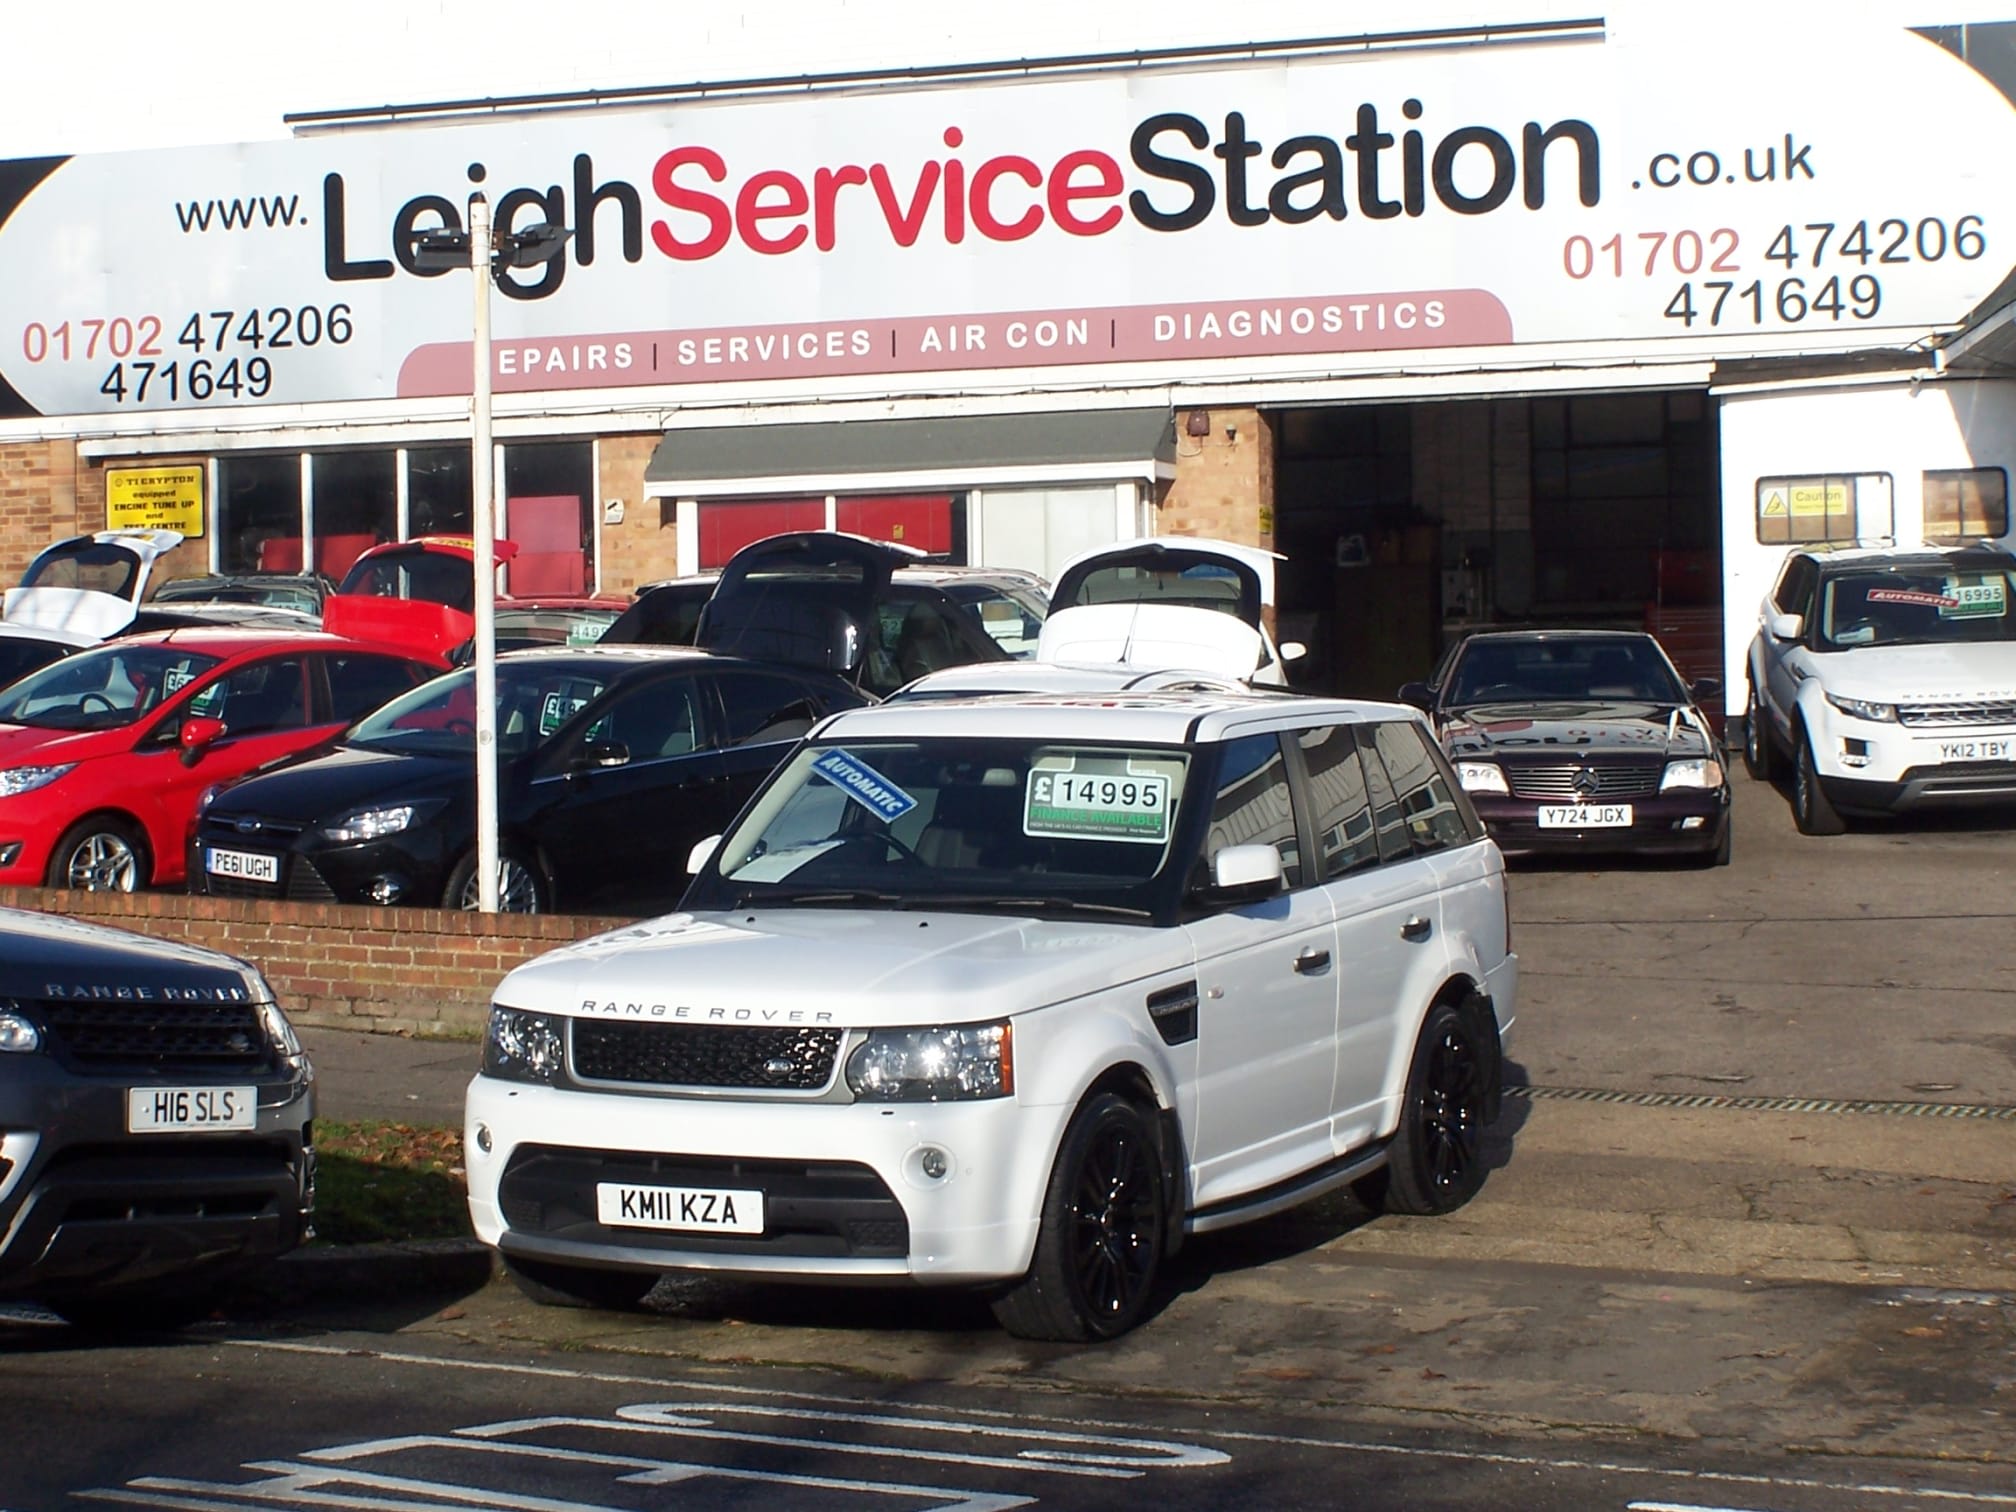 Images Leigh Service Station Ltd